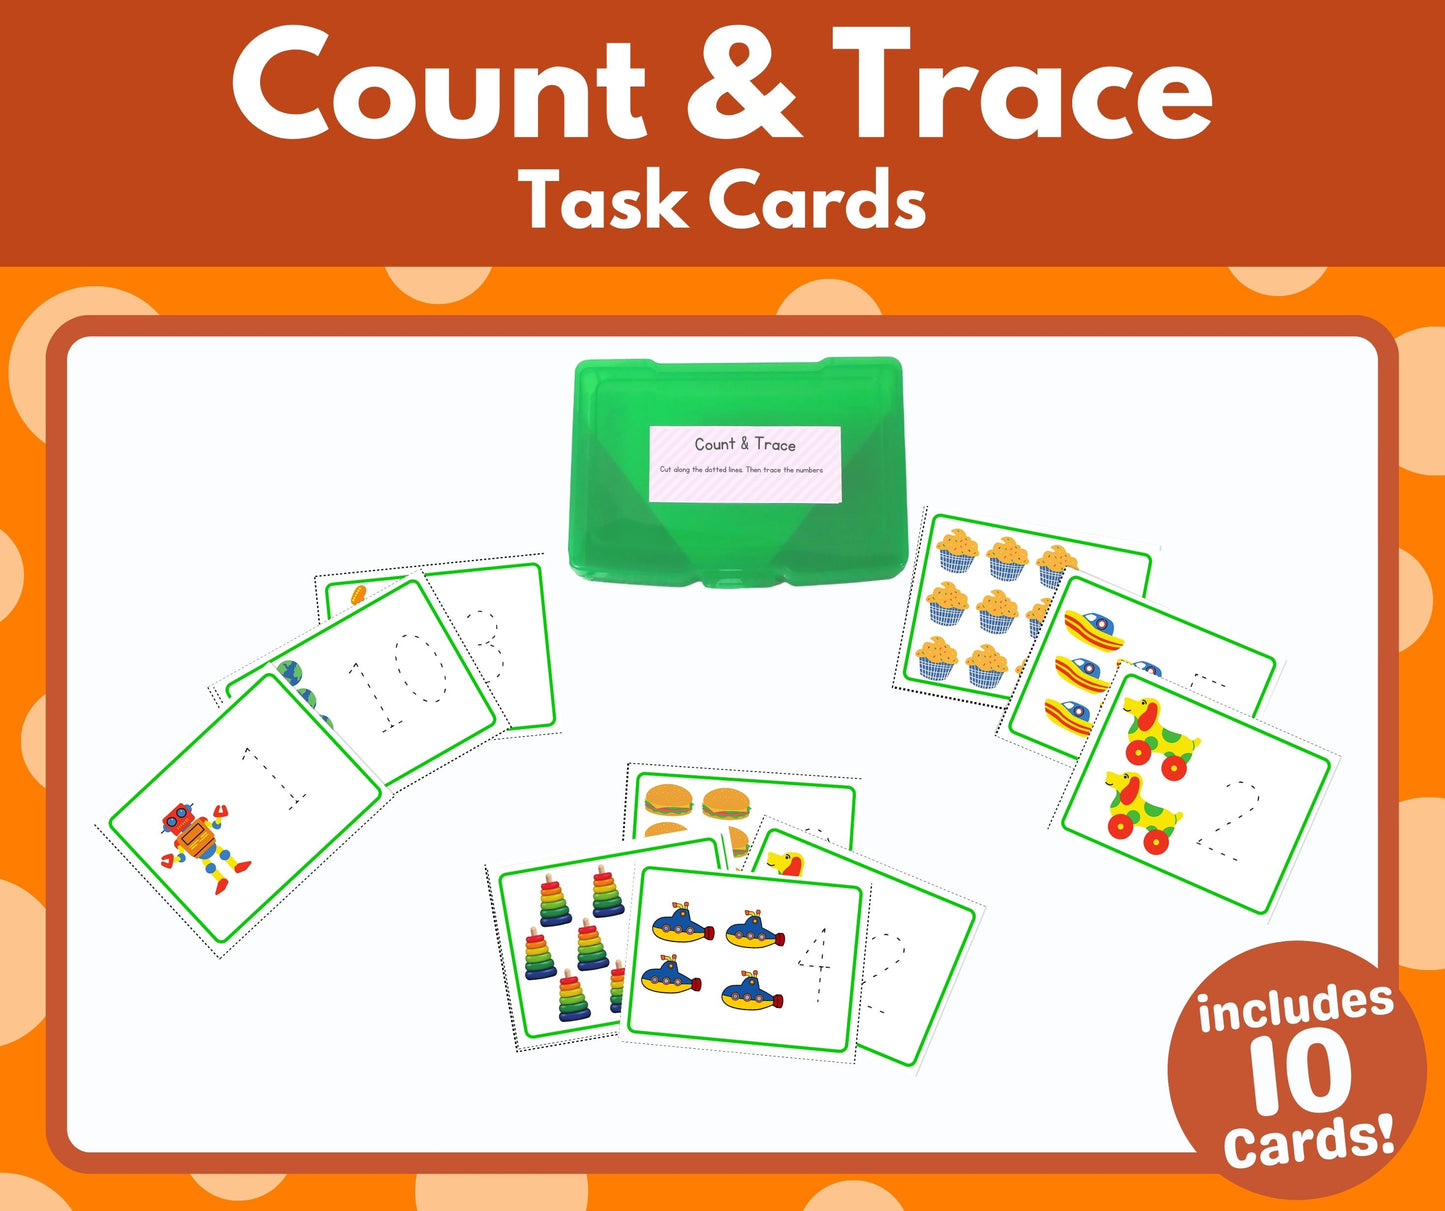 Count & Trace Task Cards (Task Box Activity) - Download